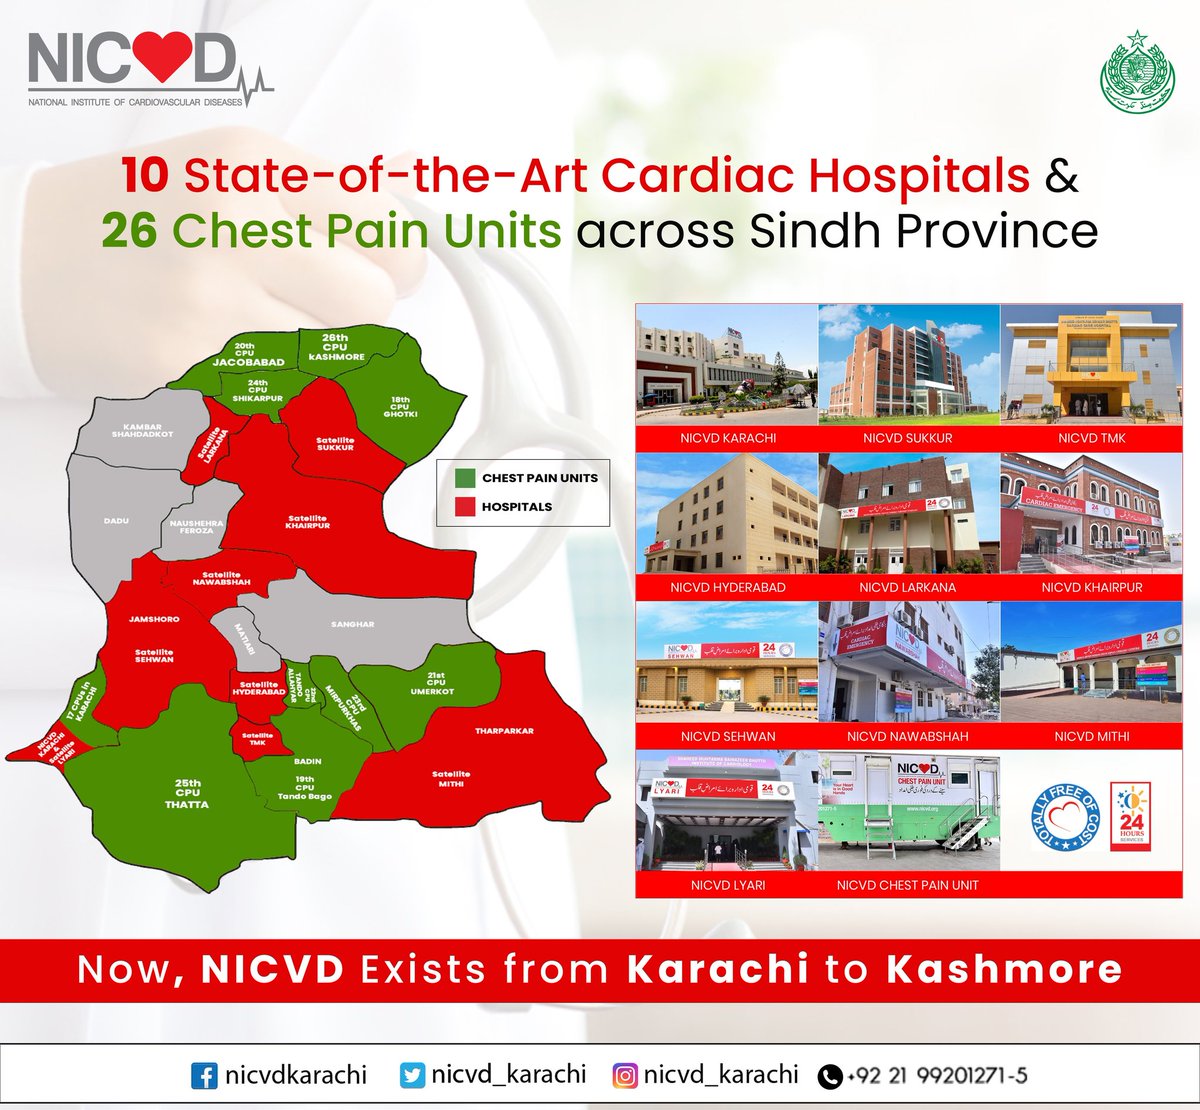 Now, NICVD Exists from Karachi to Kashmore❤
#HealthcareForAll #FreeOfCost